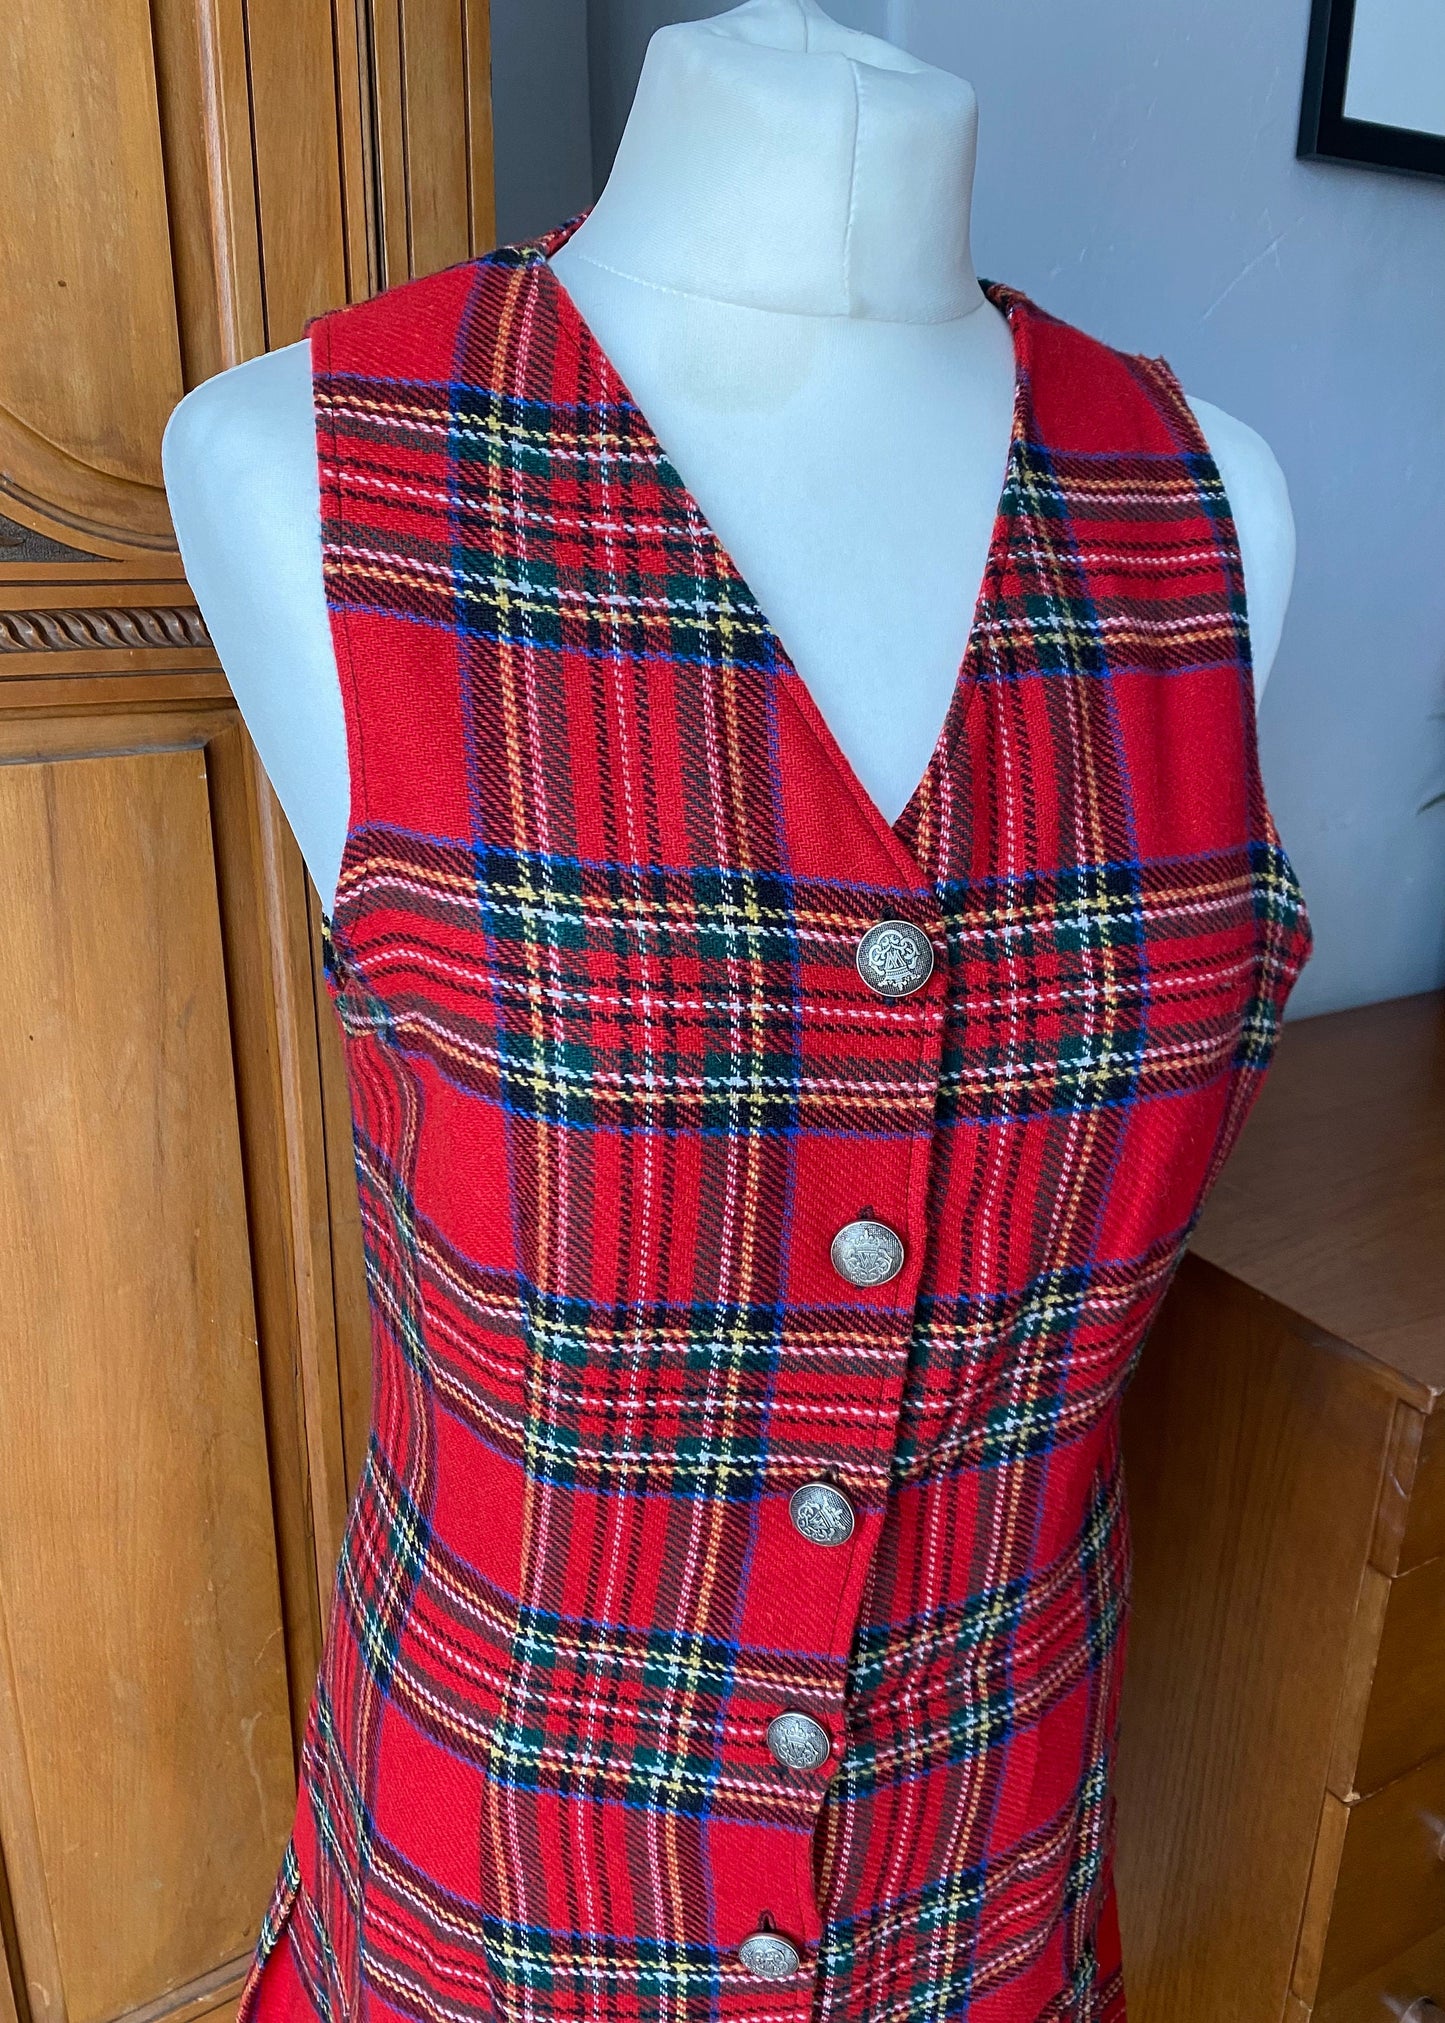 Vintage tartan mini dress. Plaid pinafore with metal buttons and pleated  skirt. 90s Grunge style. Approx UK size 6-8